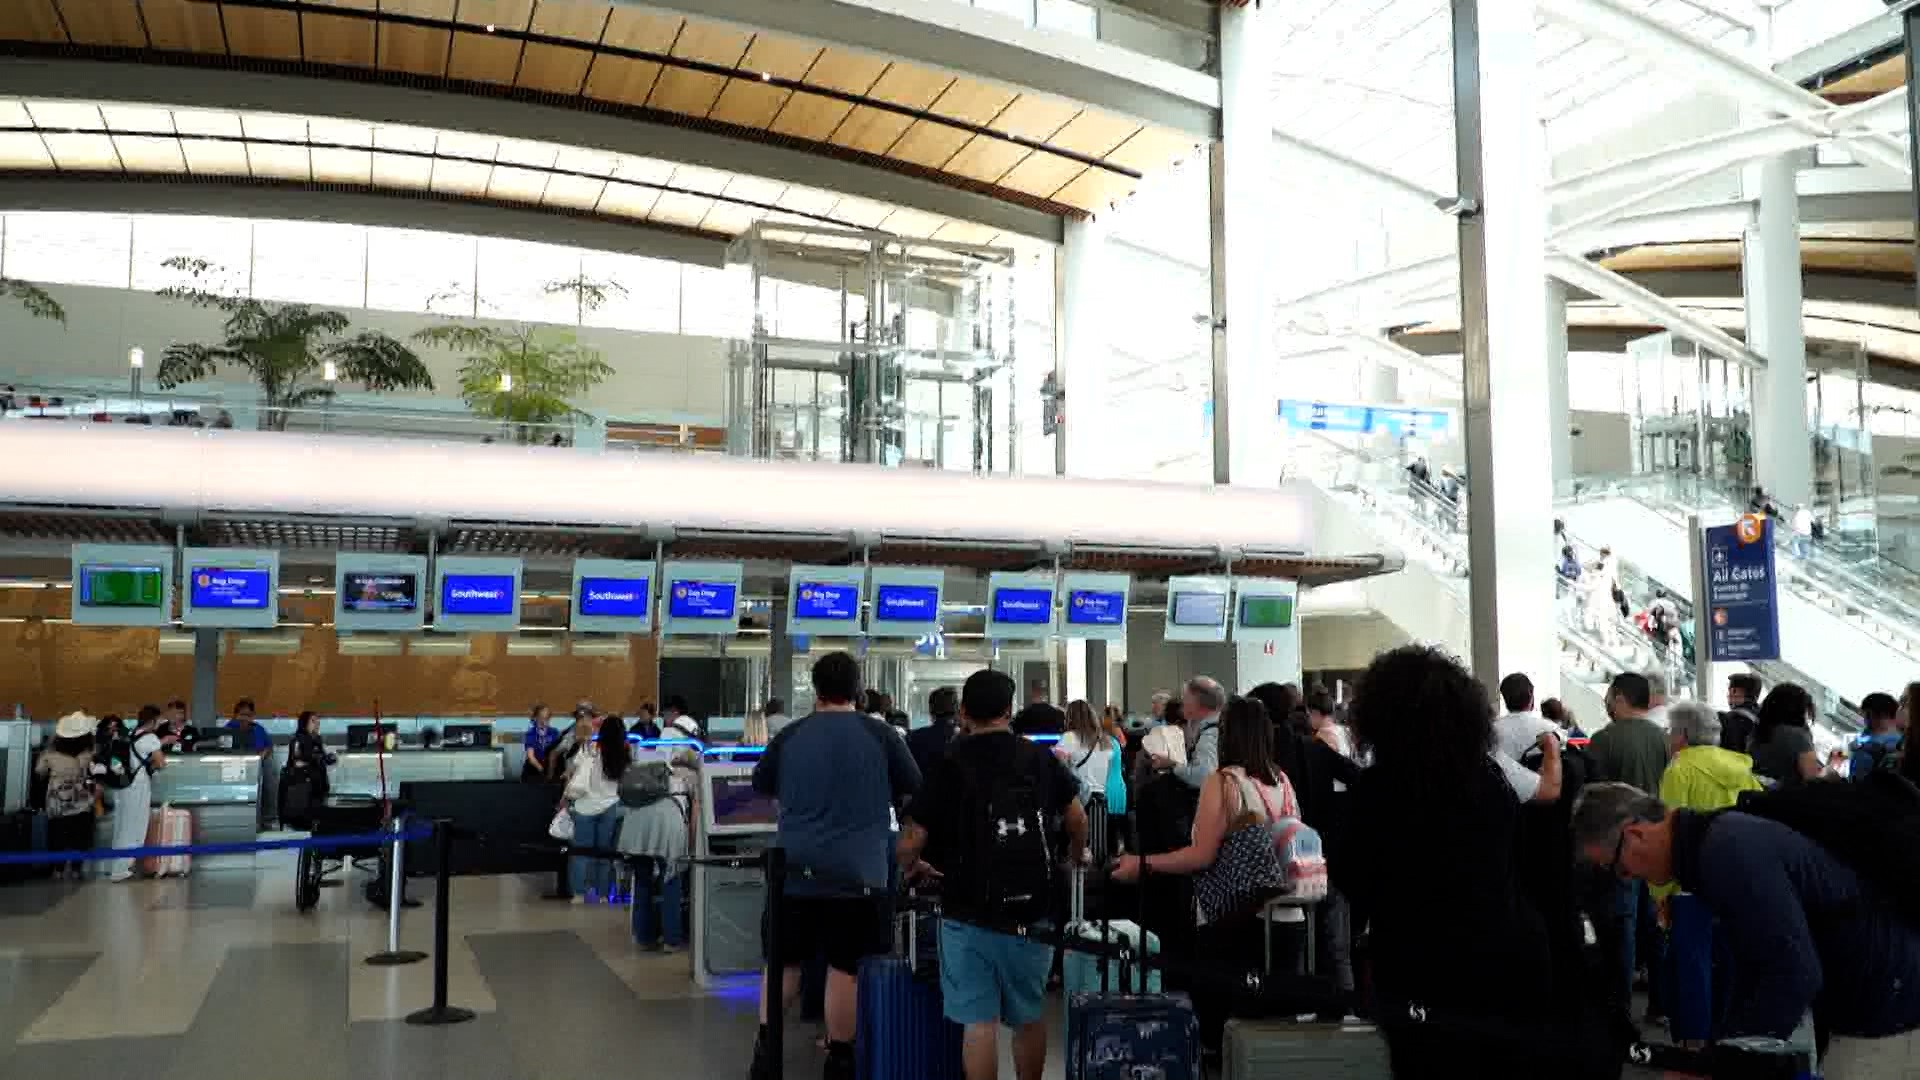 Internet outage at SMF being investigated as vandalism | Latest